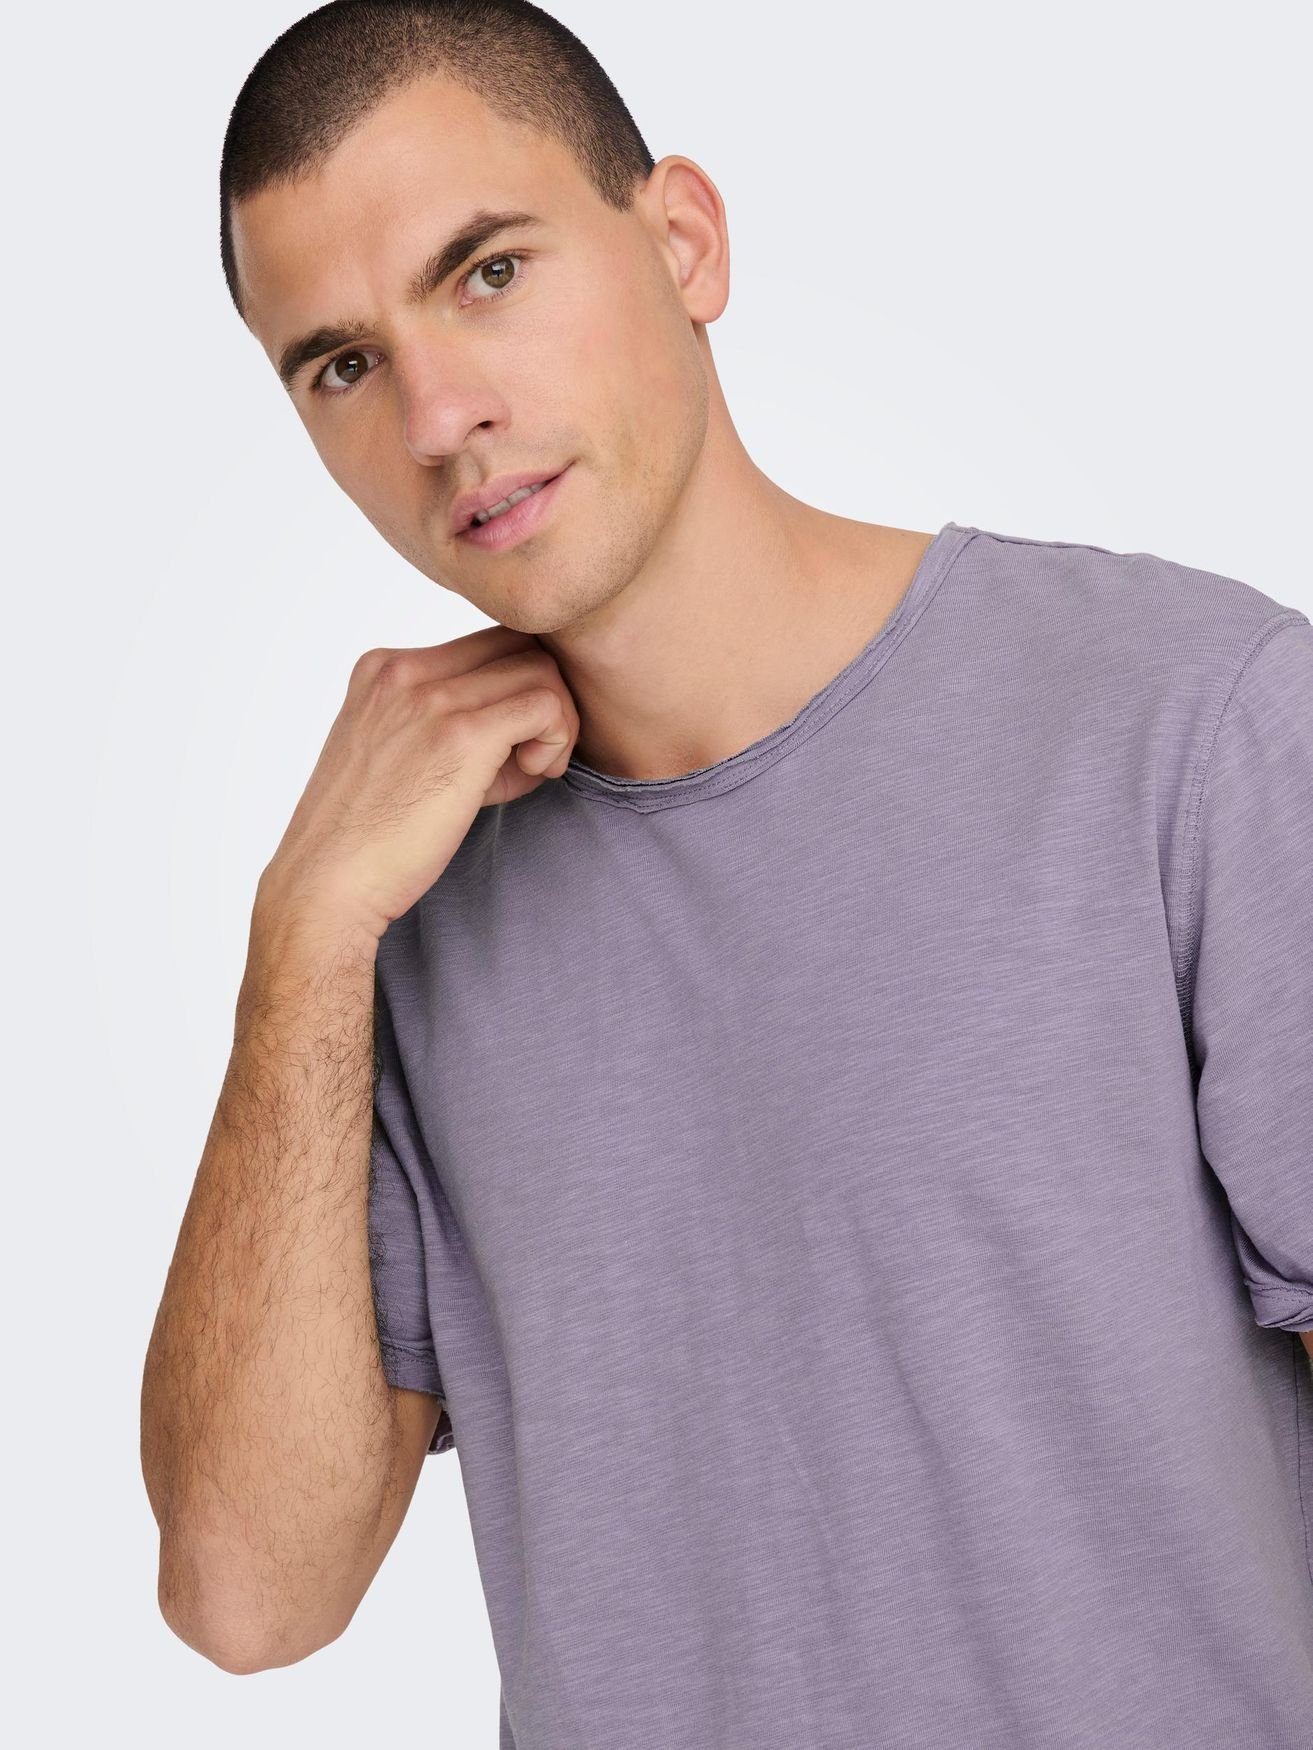 ONLY & T-Shirt in T-Shirt Lila Kurzarm Einfarbiges SONS 4783 ONSBENNE Langes Shirt Basic Rundhals